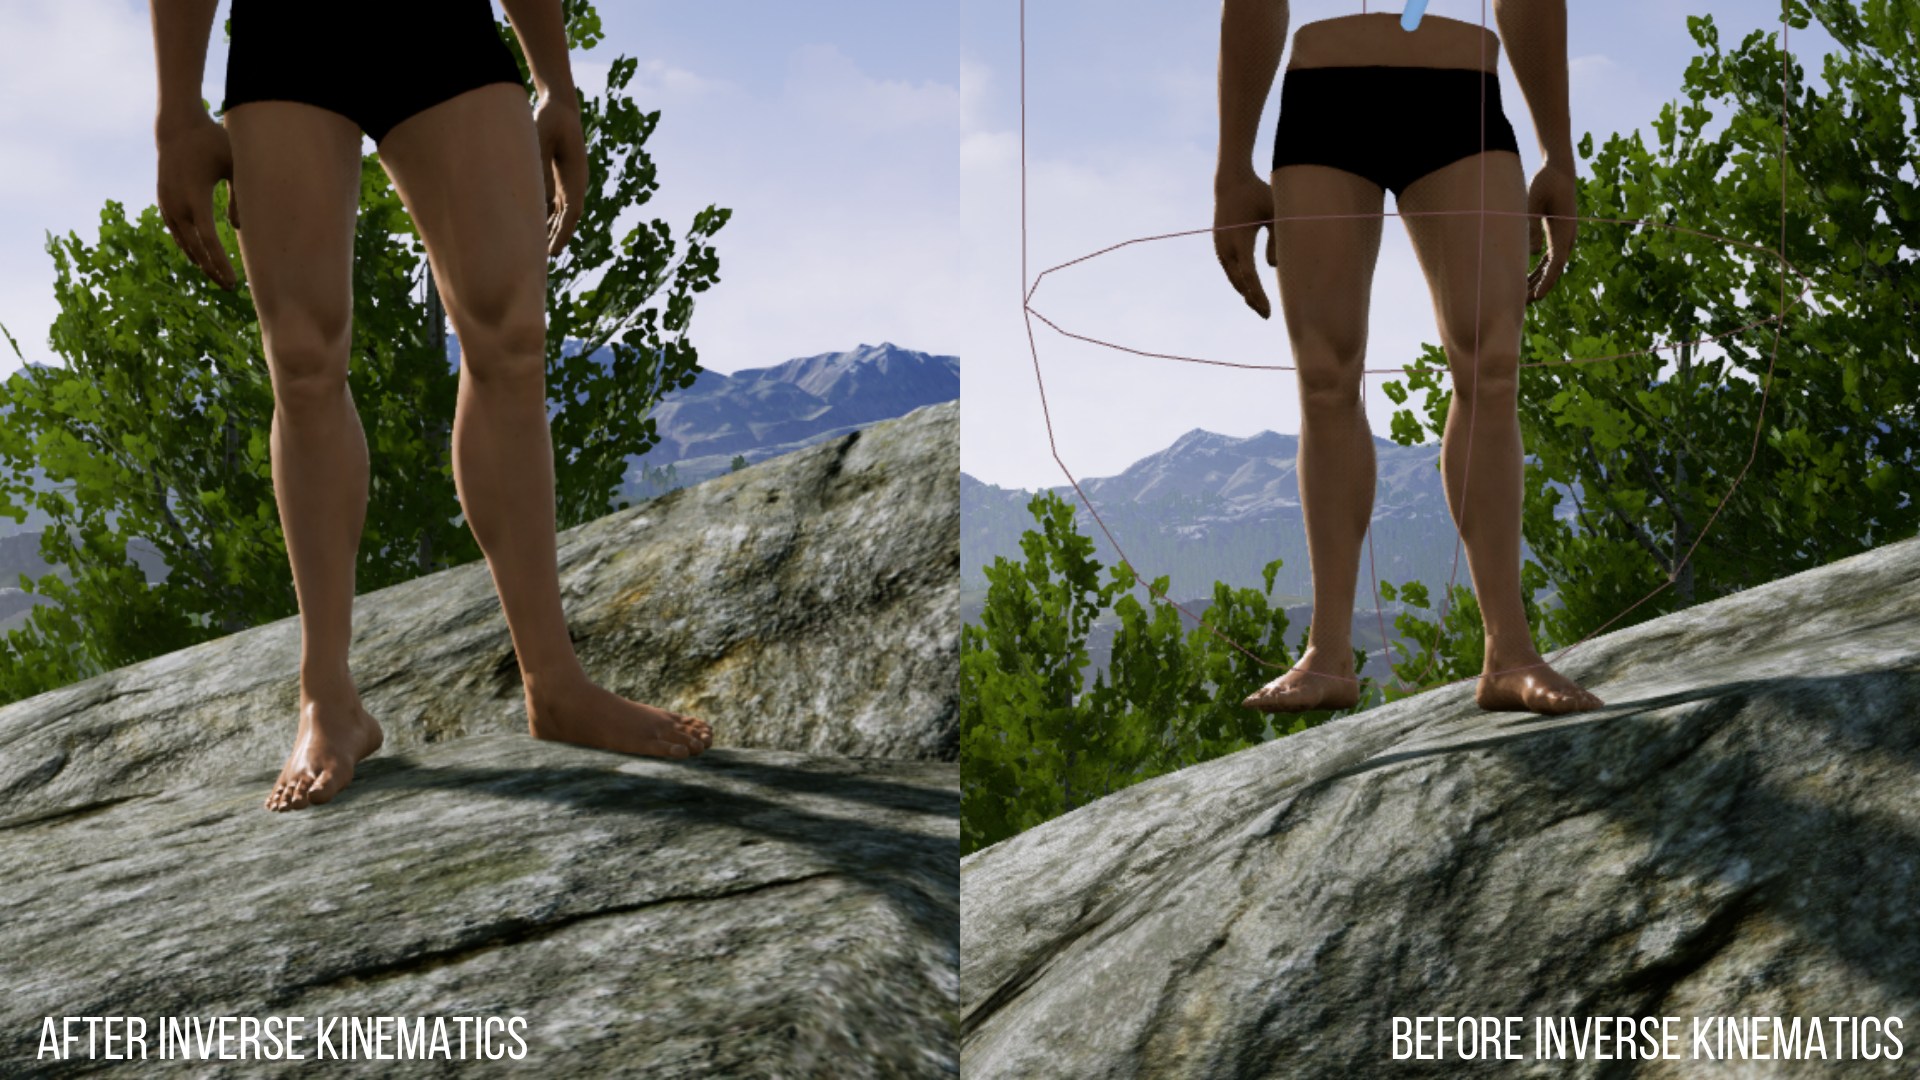 Before and after inverse kinematics